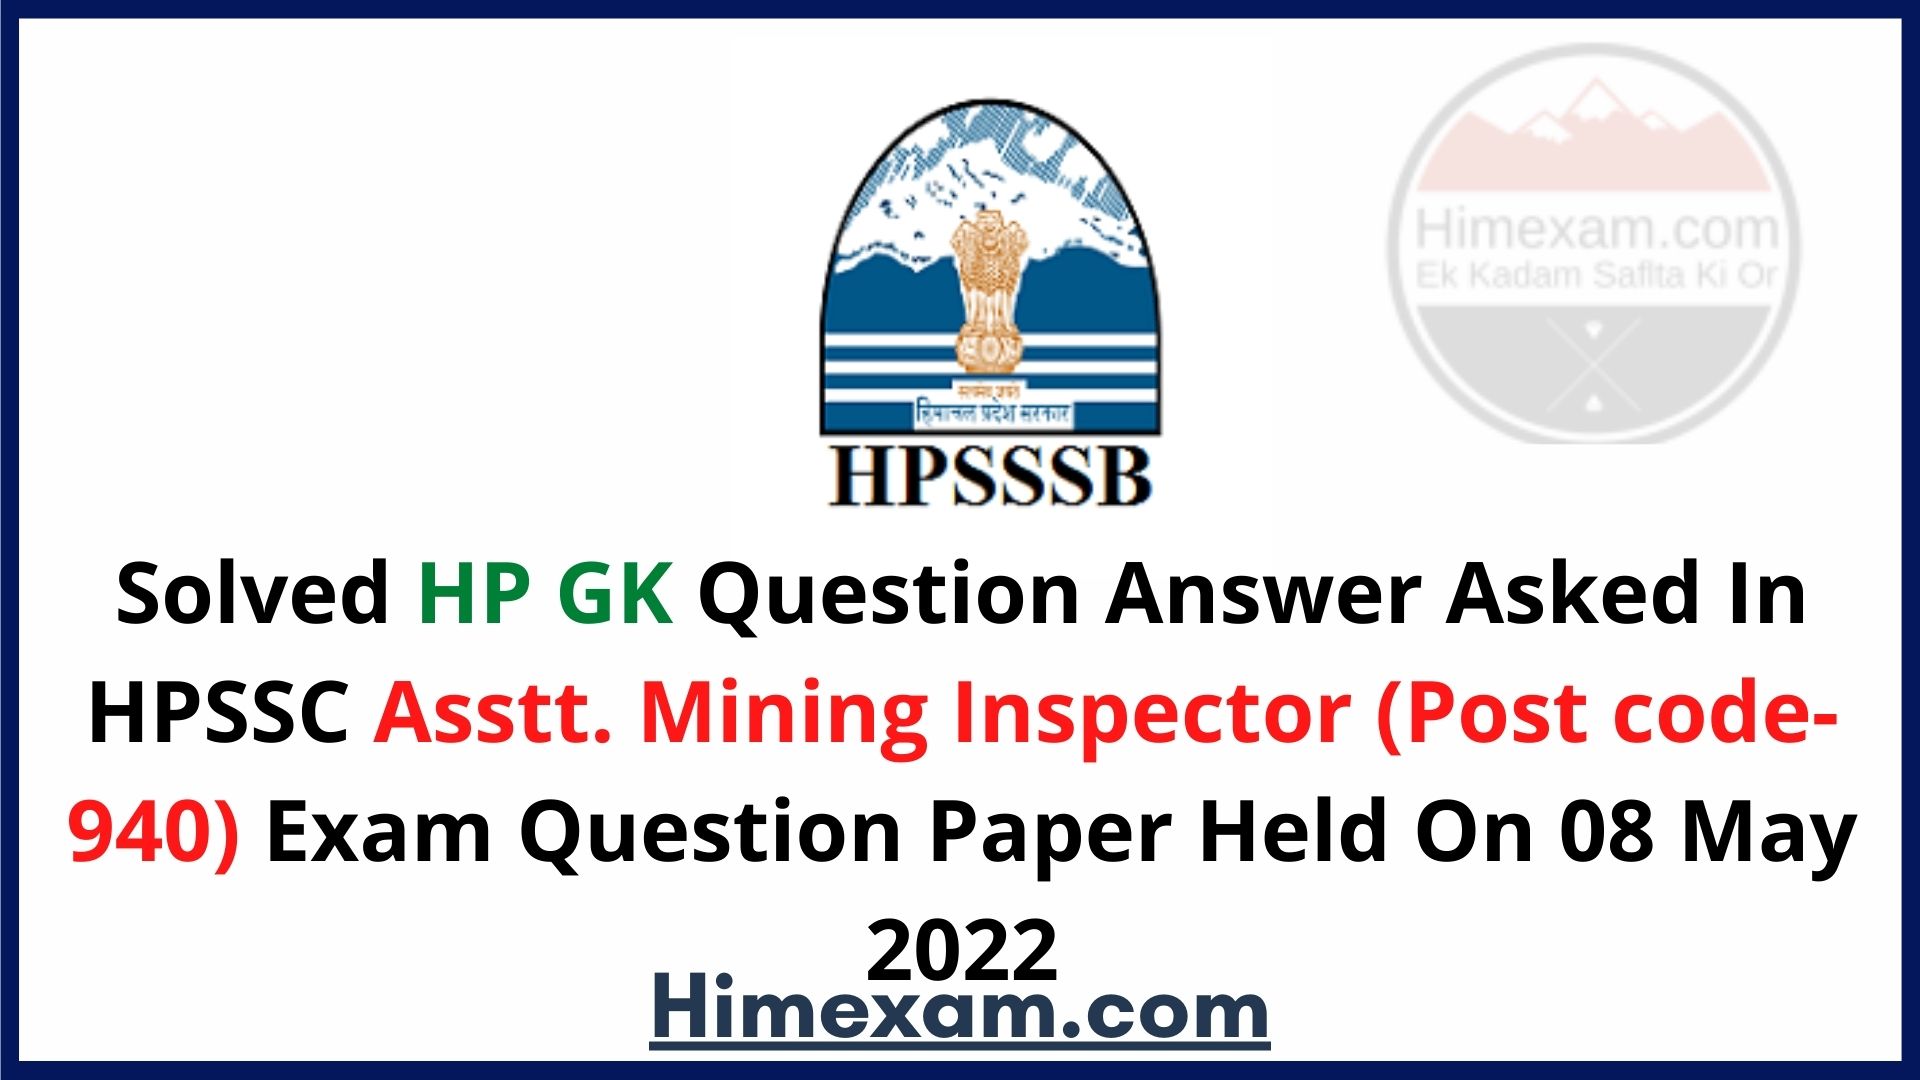 Solved HP GK Question Answer Asked In HPSSC Asstt. Mining Inspector  (Post code-940) Exam Question Paper Held On 08 May 2022